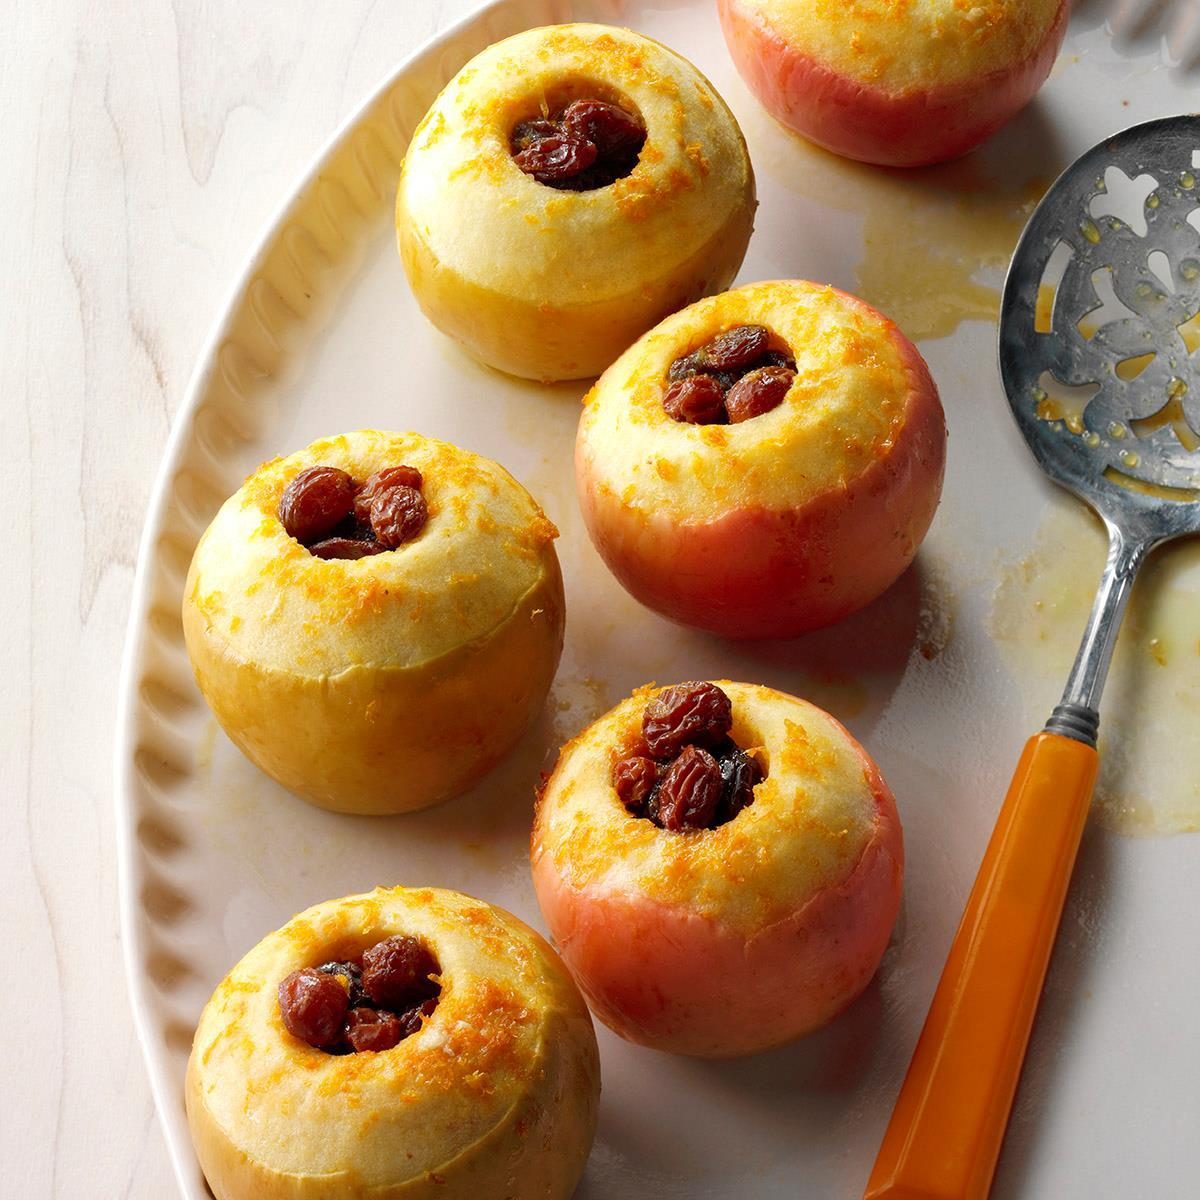 Slow-Cooker Baked Apples Recipe: How to Make It